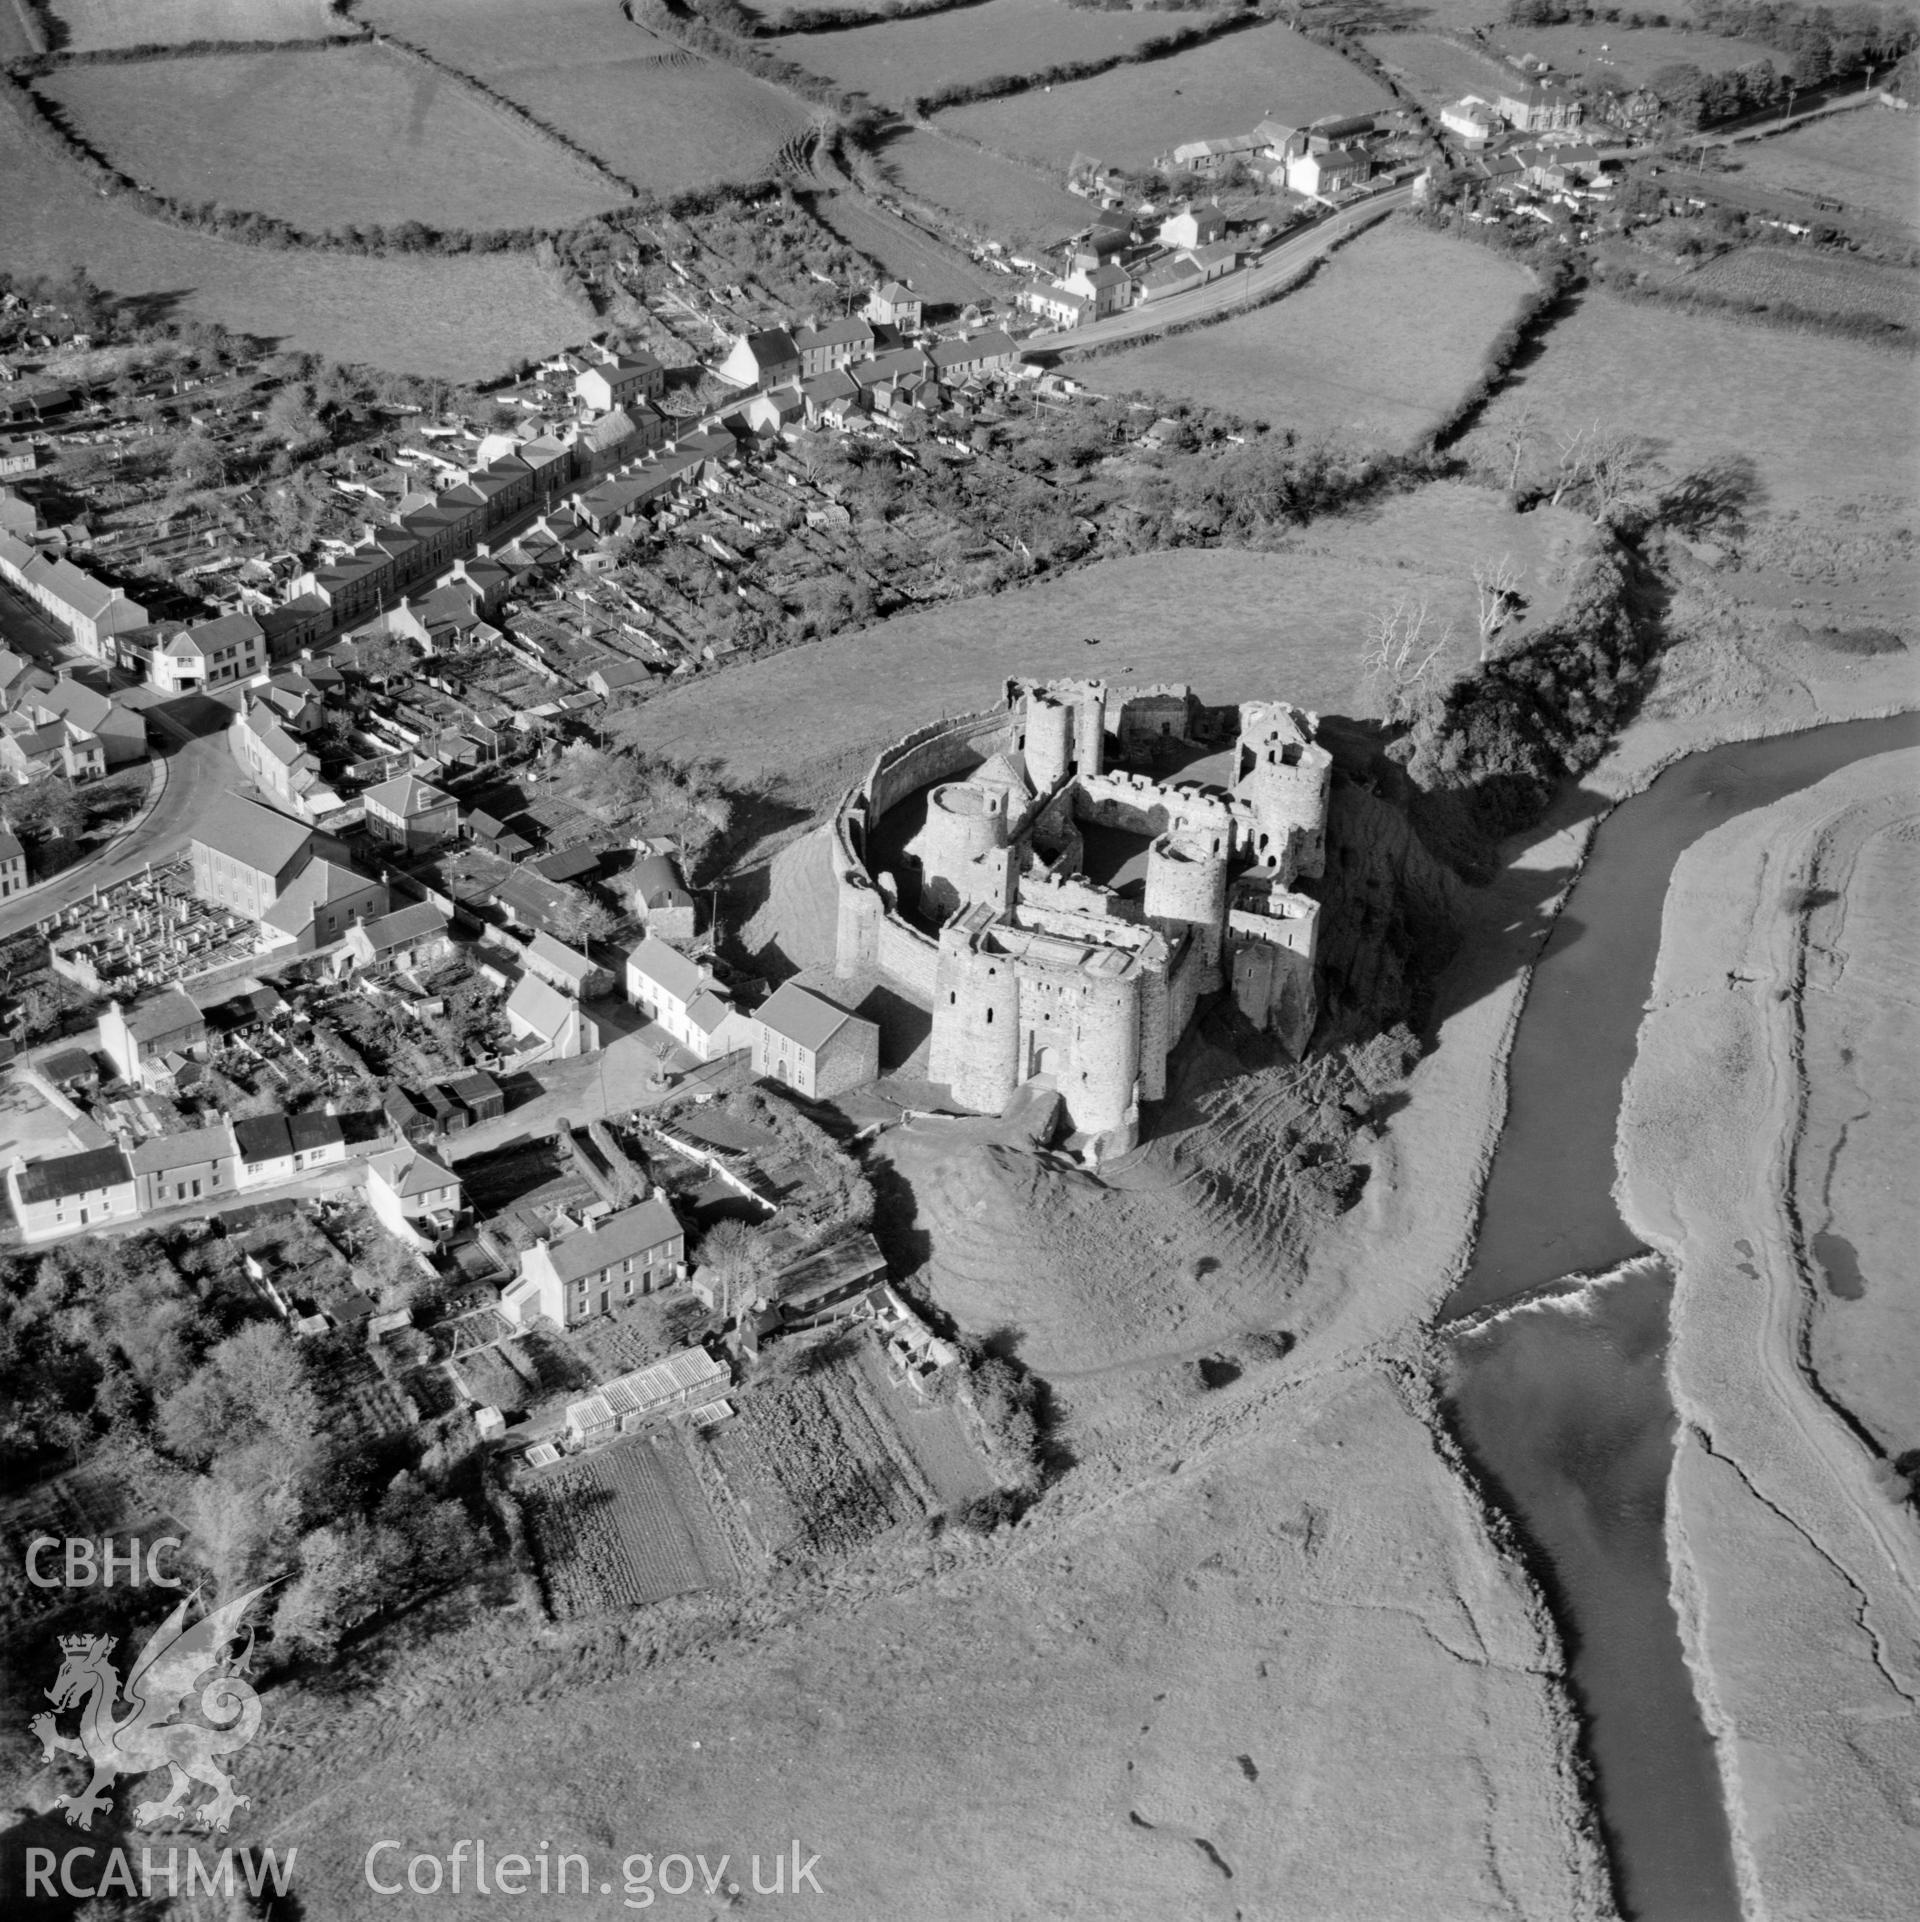 View of Kidwelly showing castle walled borough